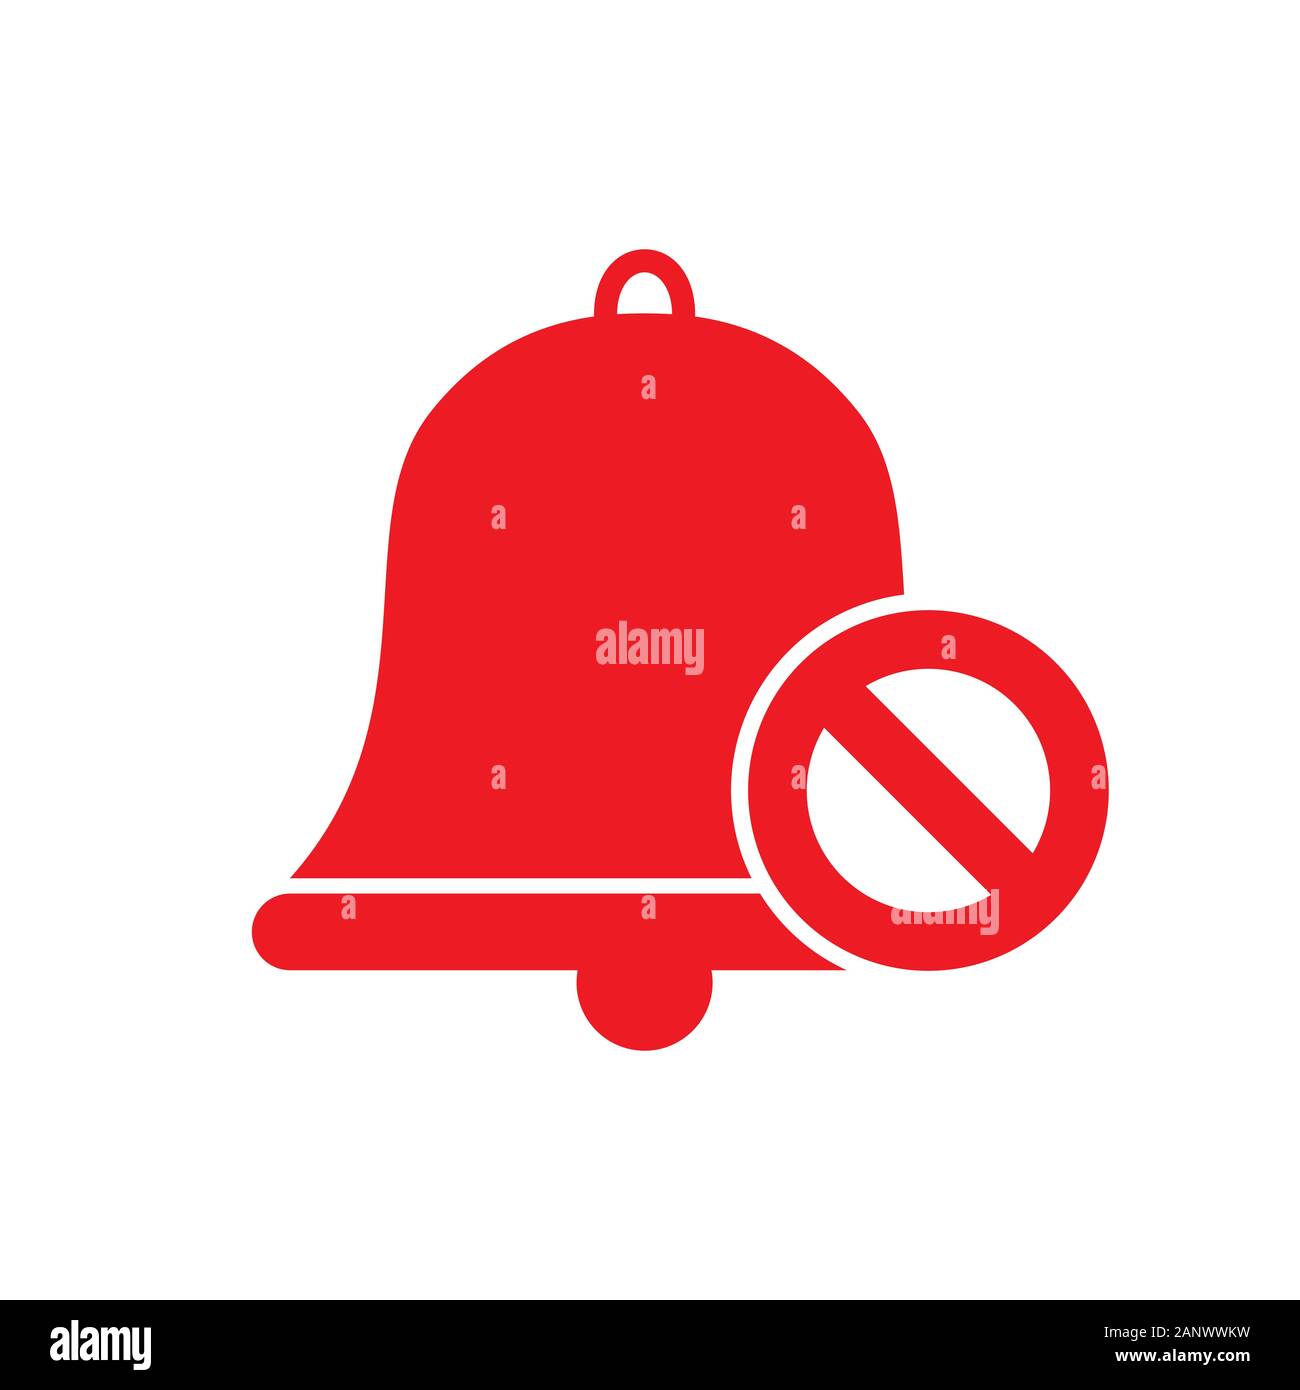 Forbidden sign. Ban icon. Red circle symbol of stop. Prohibited signal.  Vector sign Stock Vector